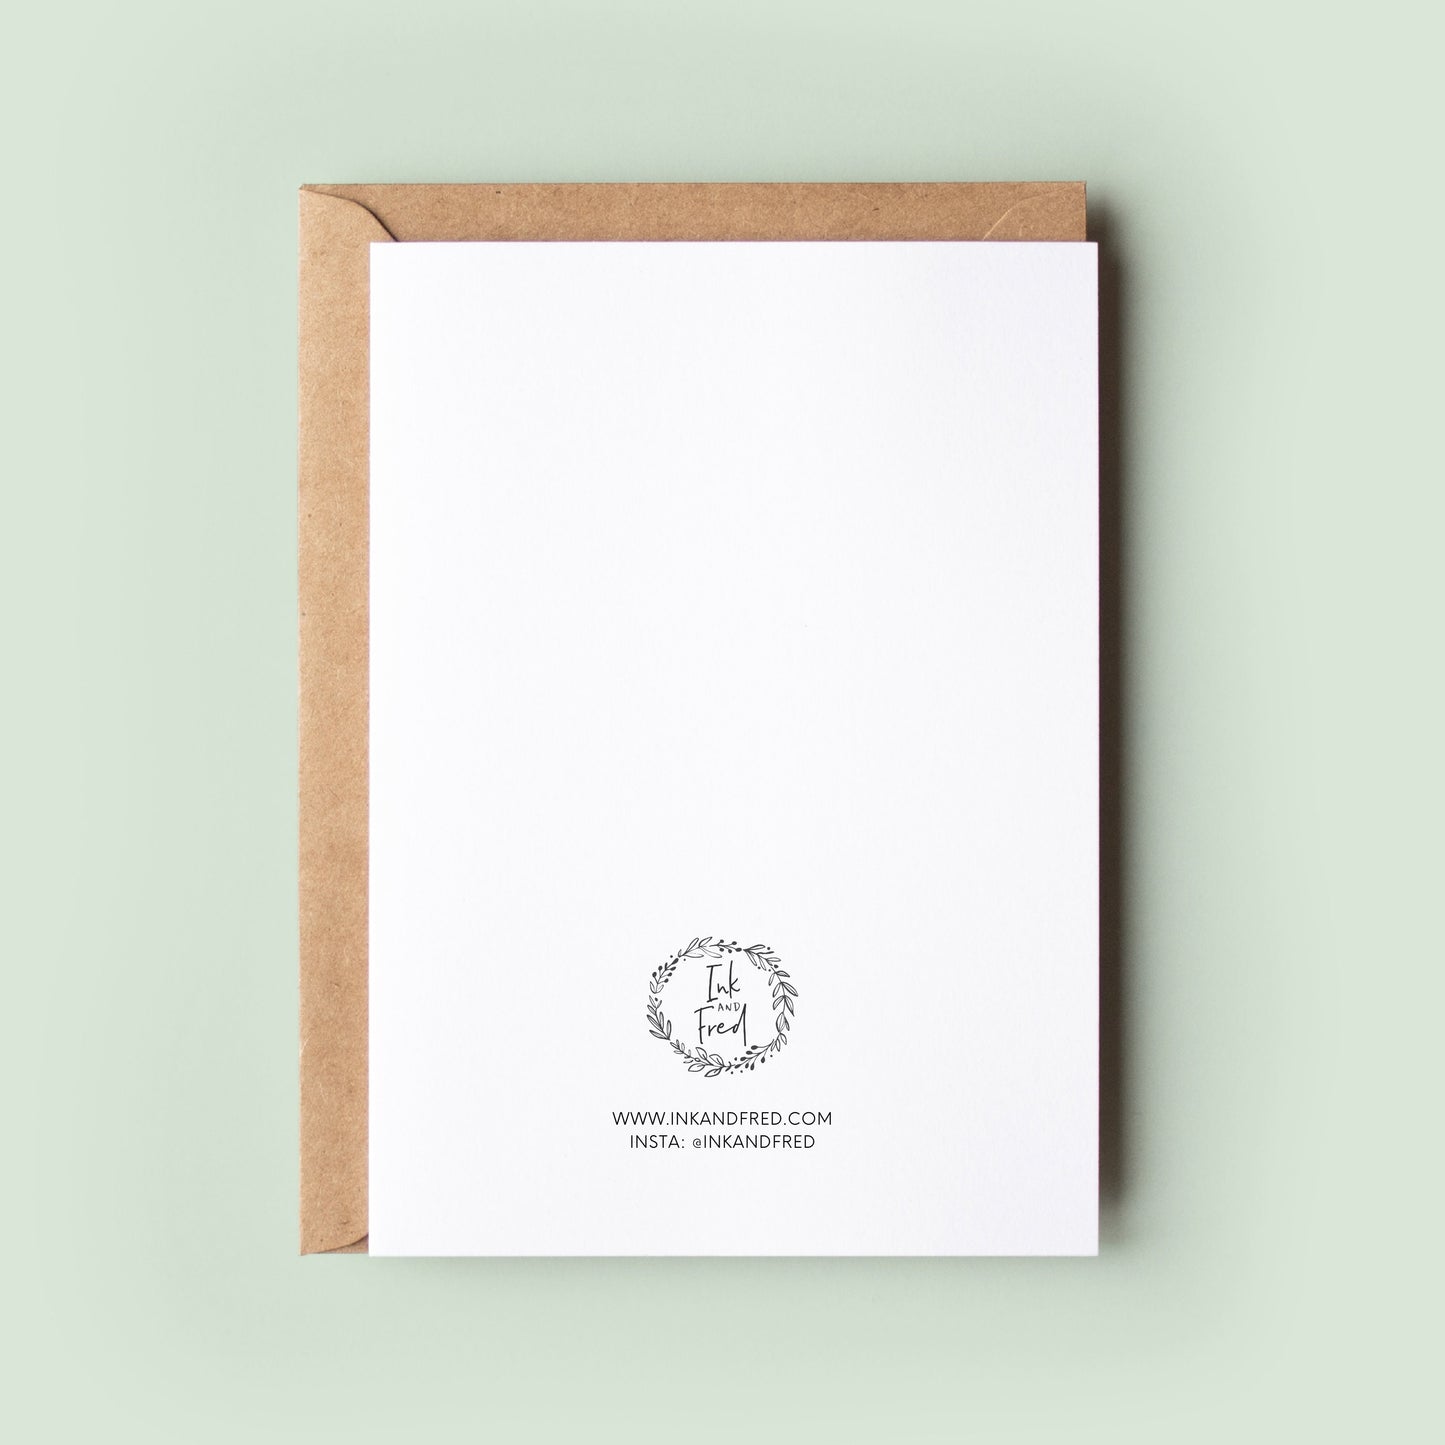 Godparent Definition Card, Will You Be My Godparent Card, GodparentProposal Card, Godparent Card, Christening Card, Godmother, Godfather